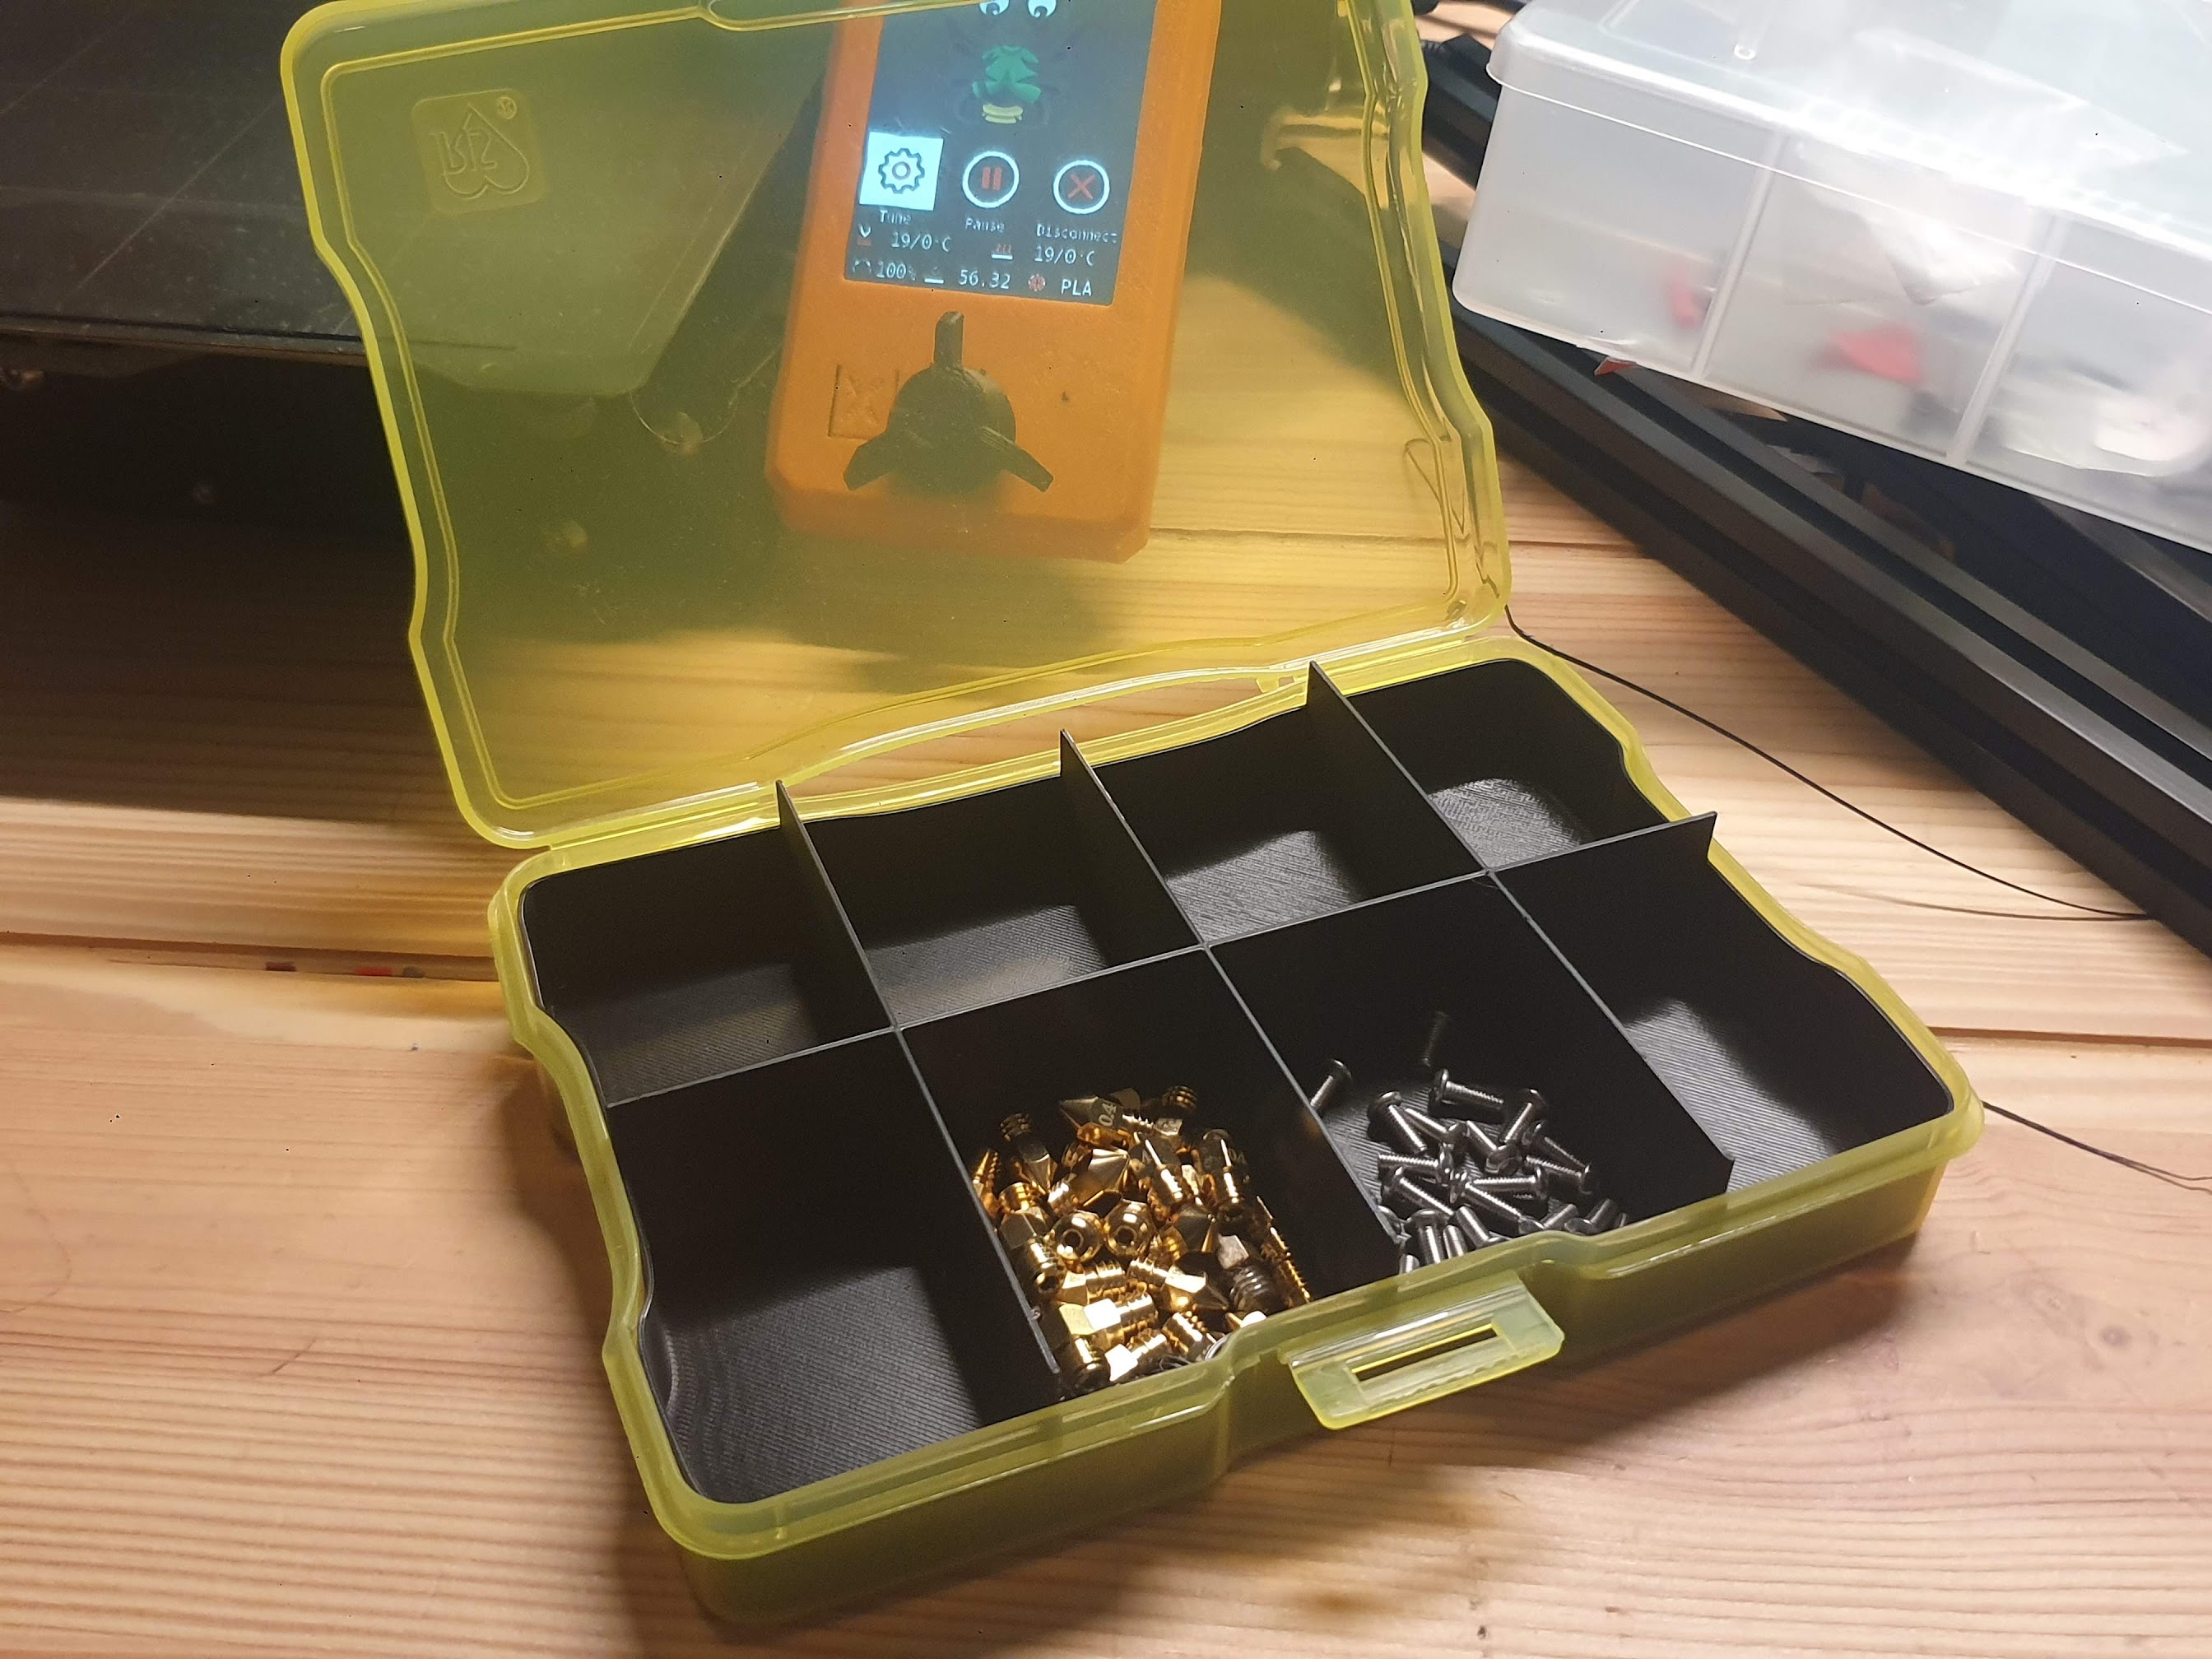 Screw box inserts for "Iris Photokeeper" containers